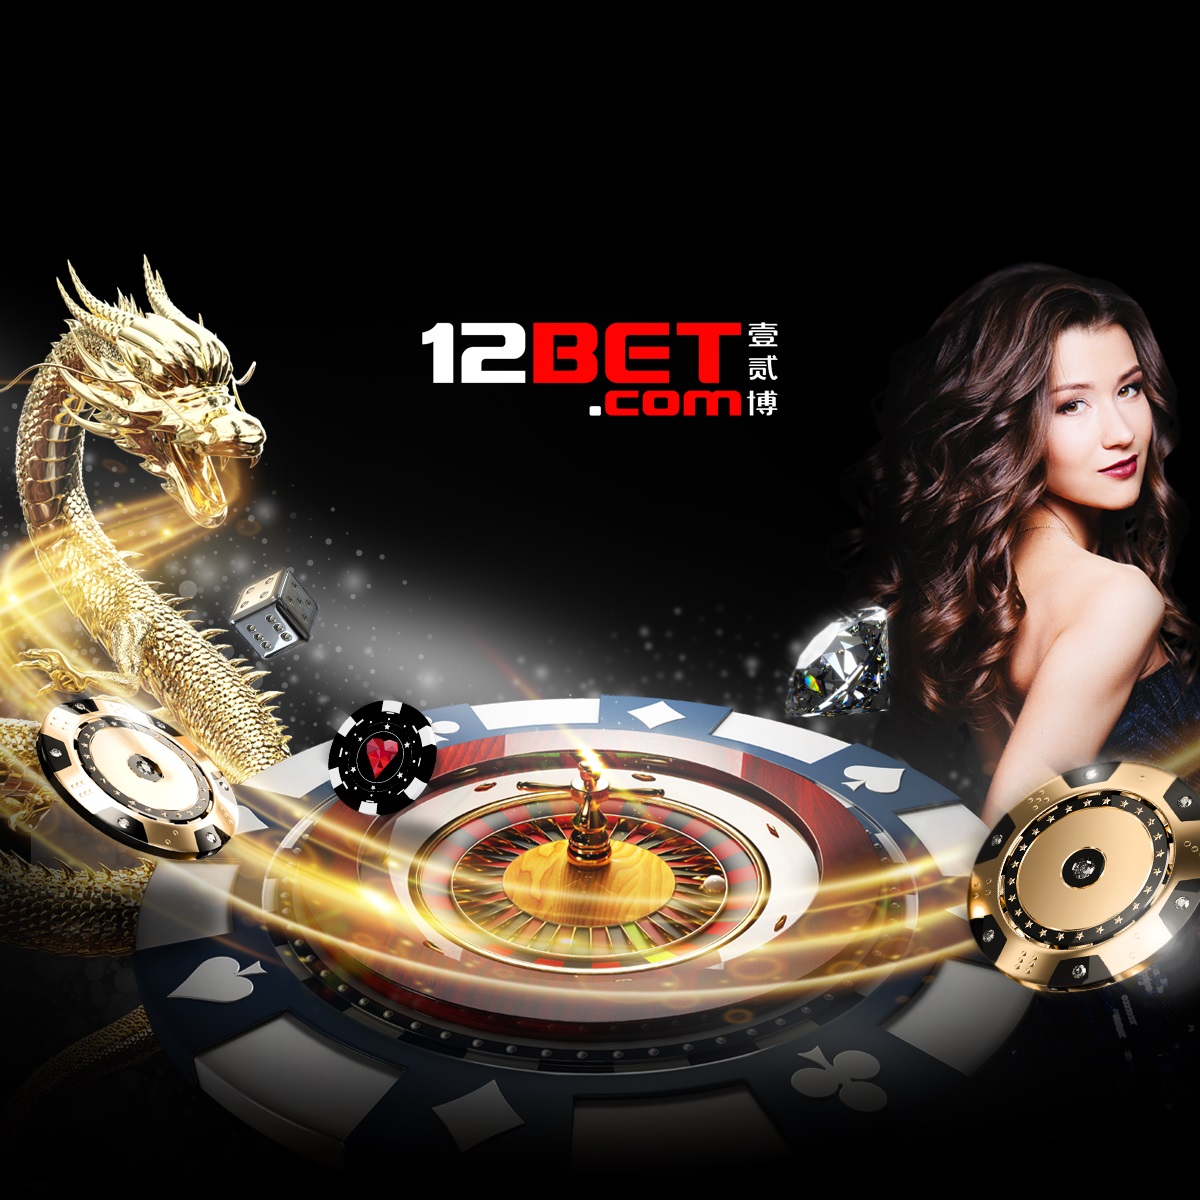 There are a wide range of online slots and table games to choose from.